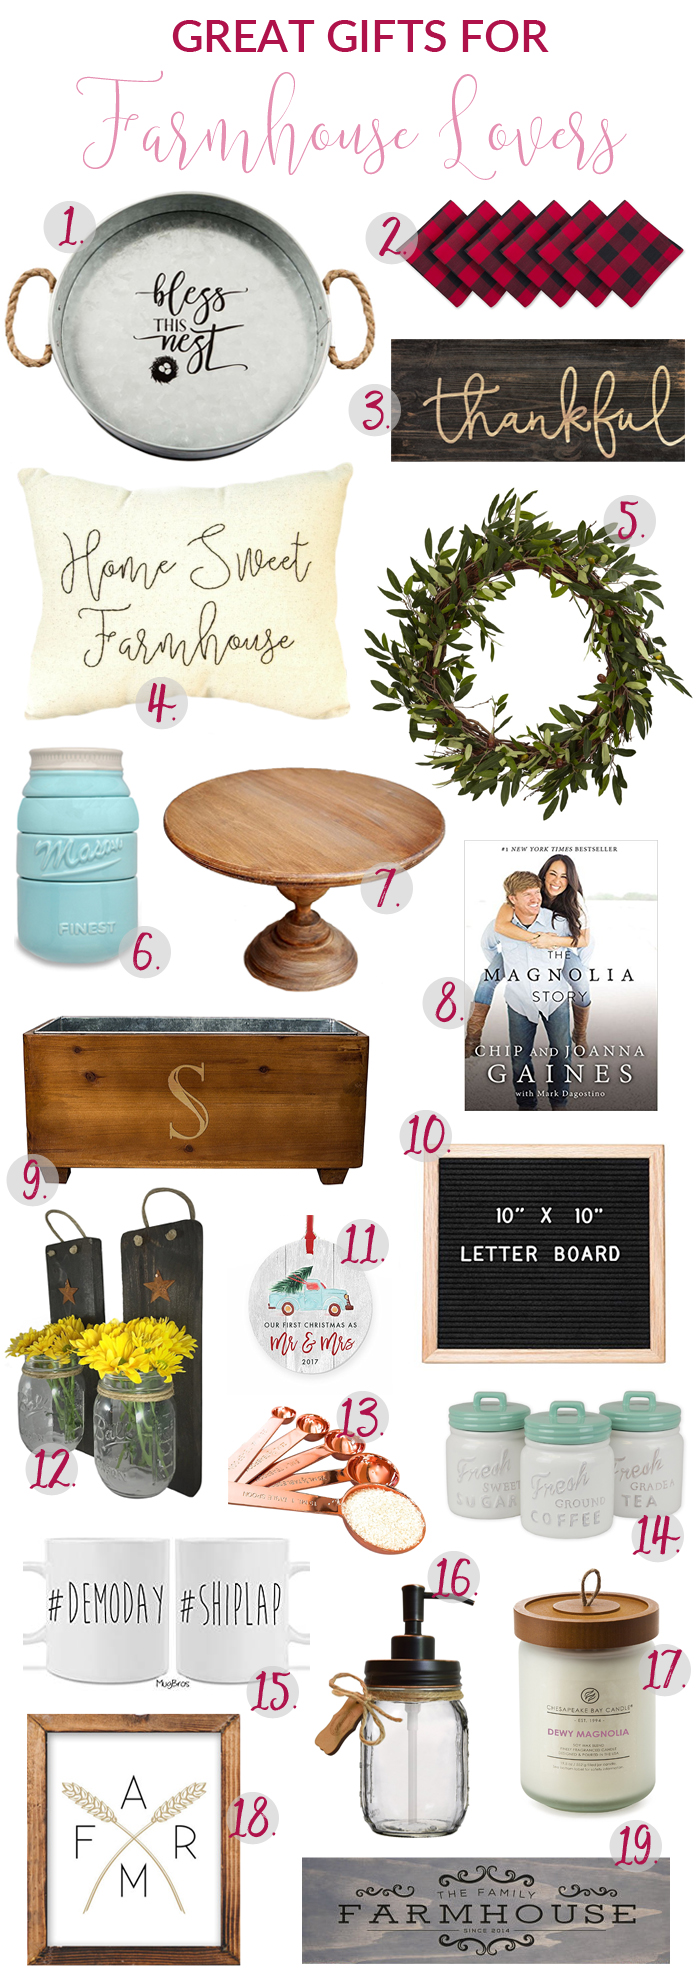 The 19 items that all farmhouse lovers need in their lives! Any and all of these make the most fabulous Christmas gifts!